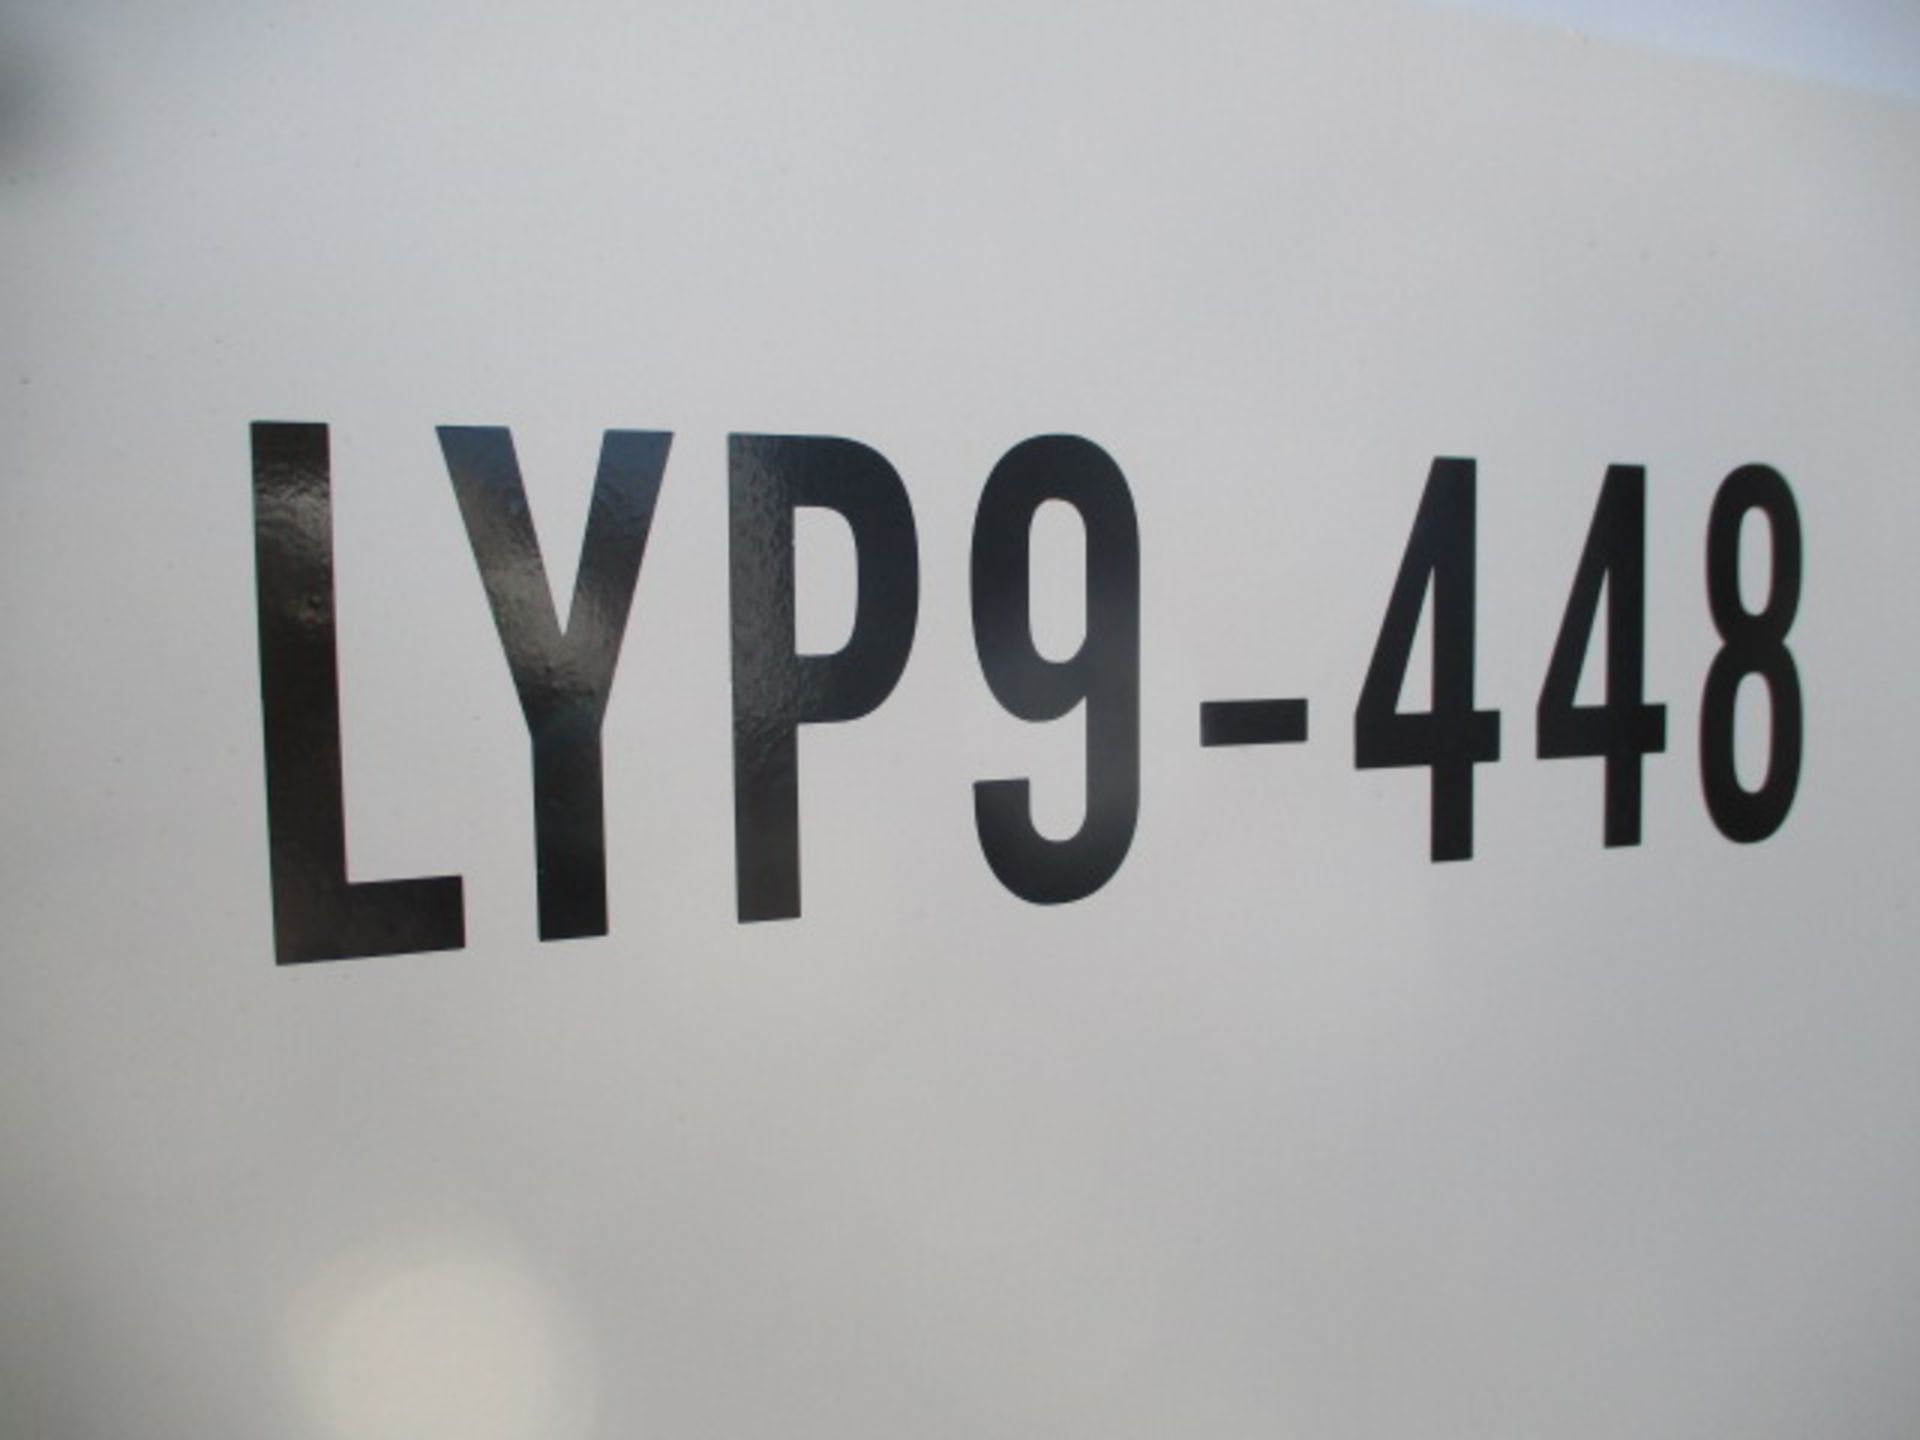 Unused 9' Portable Office Container, S/N: LYP9-448 - Image 24 of 24